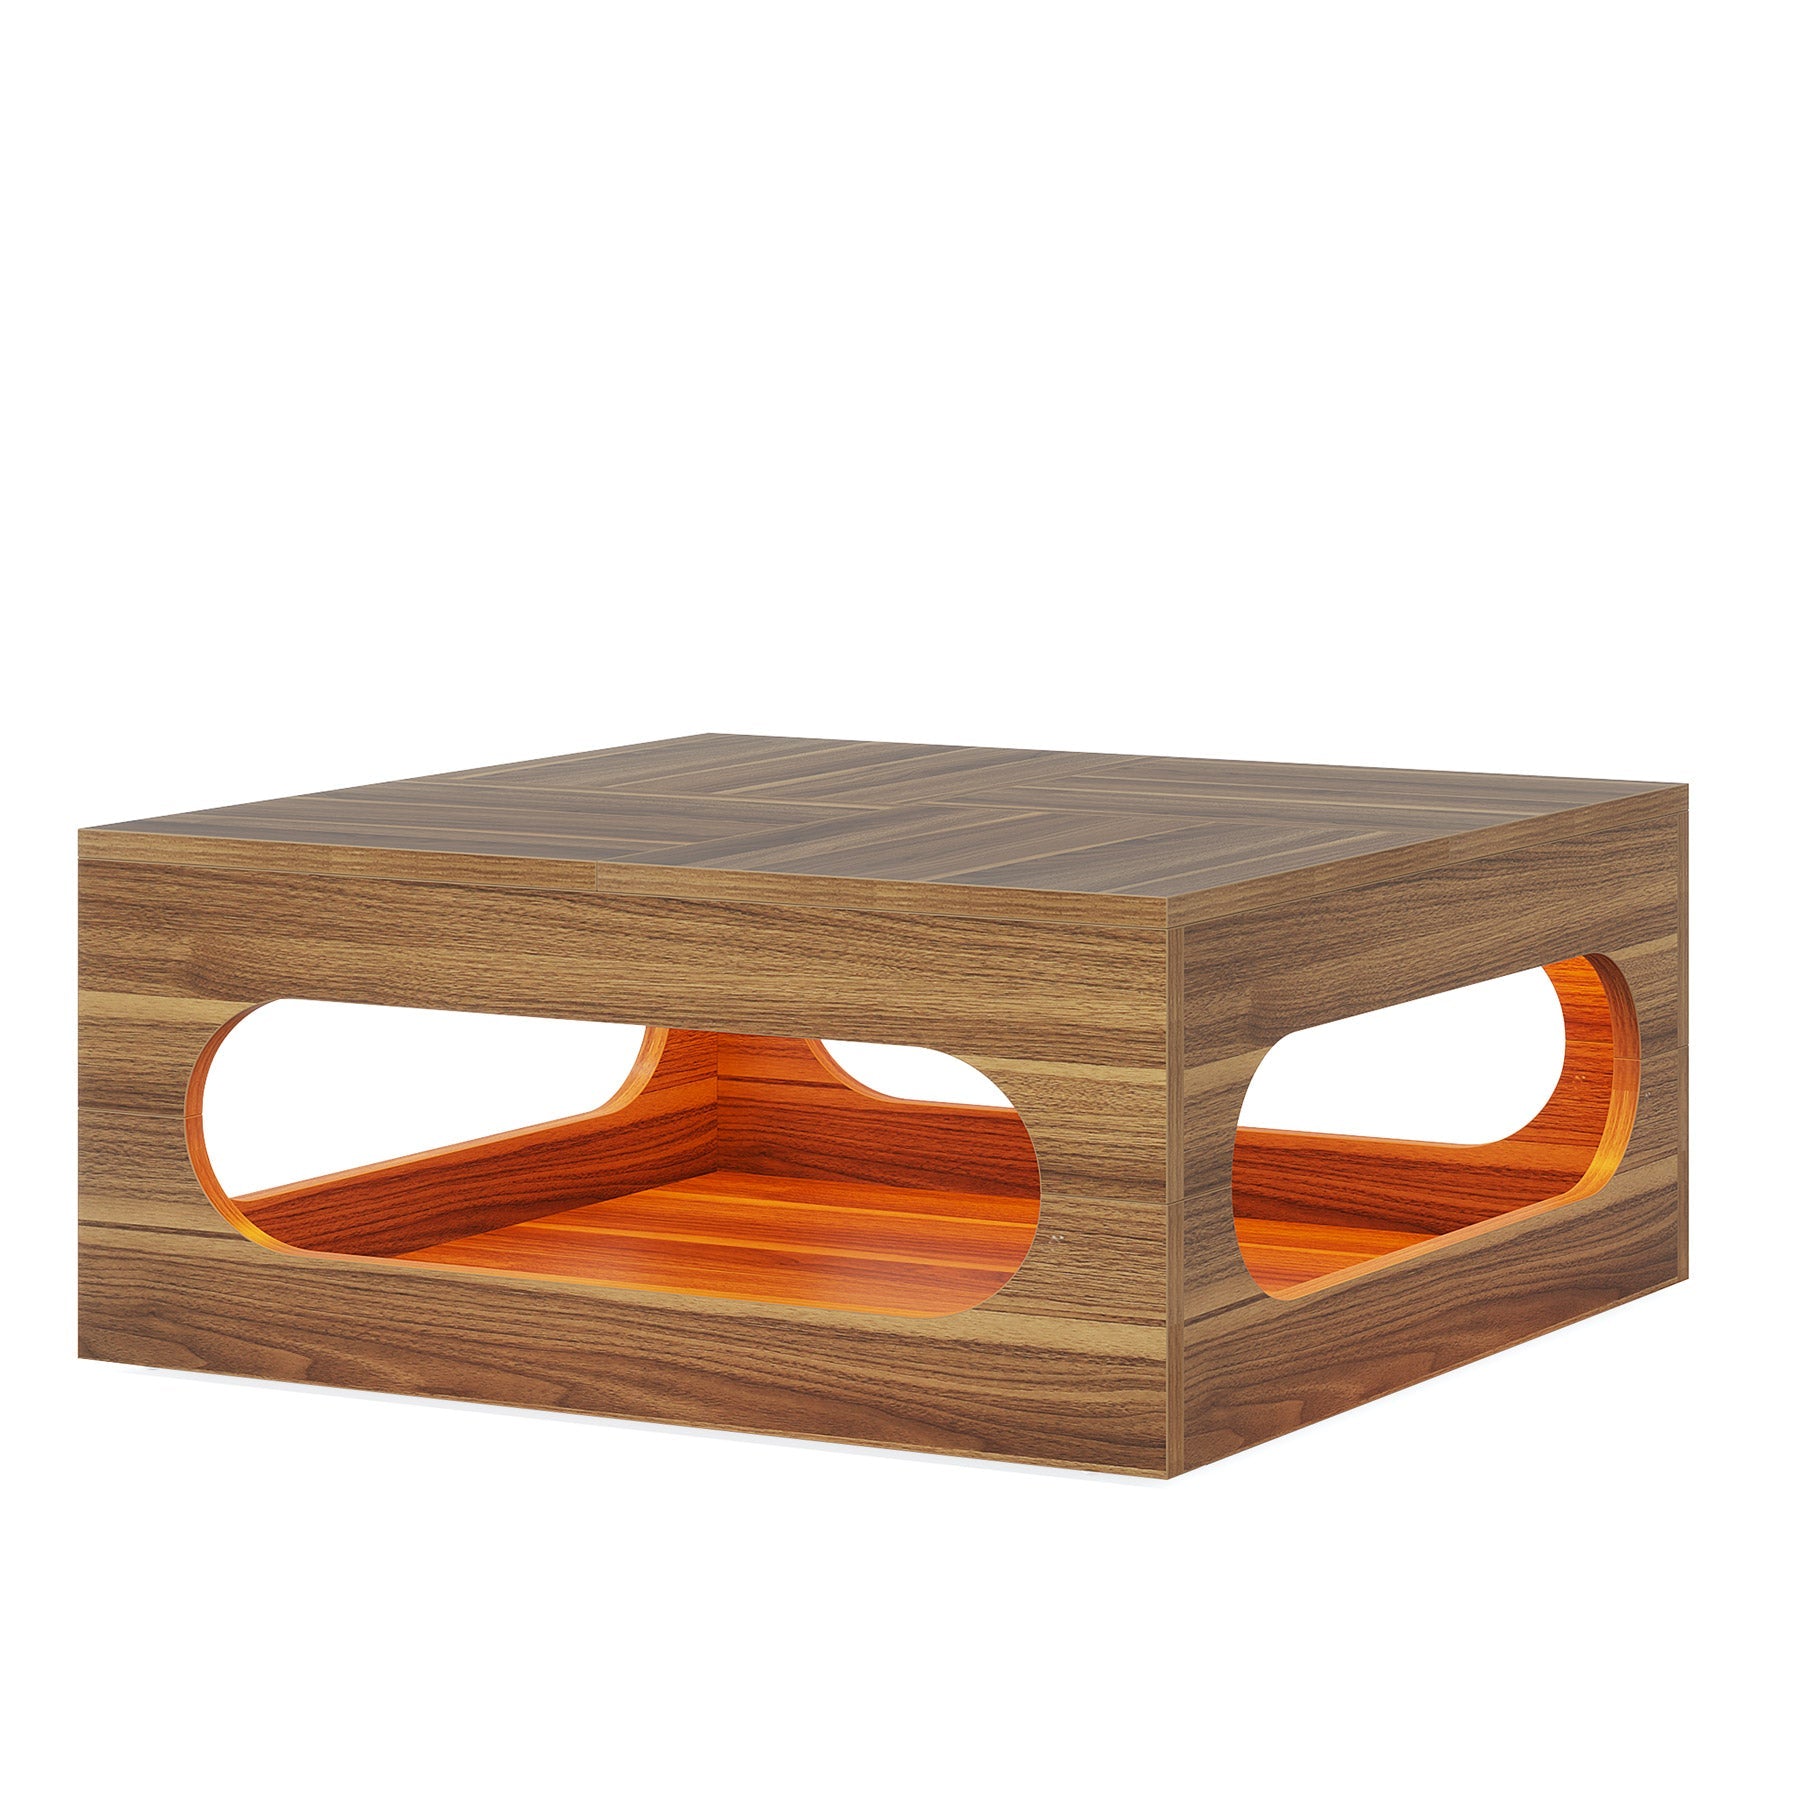 2-Tier Coffee Table, Wood Square Center Tea Table with LED Strip Light